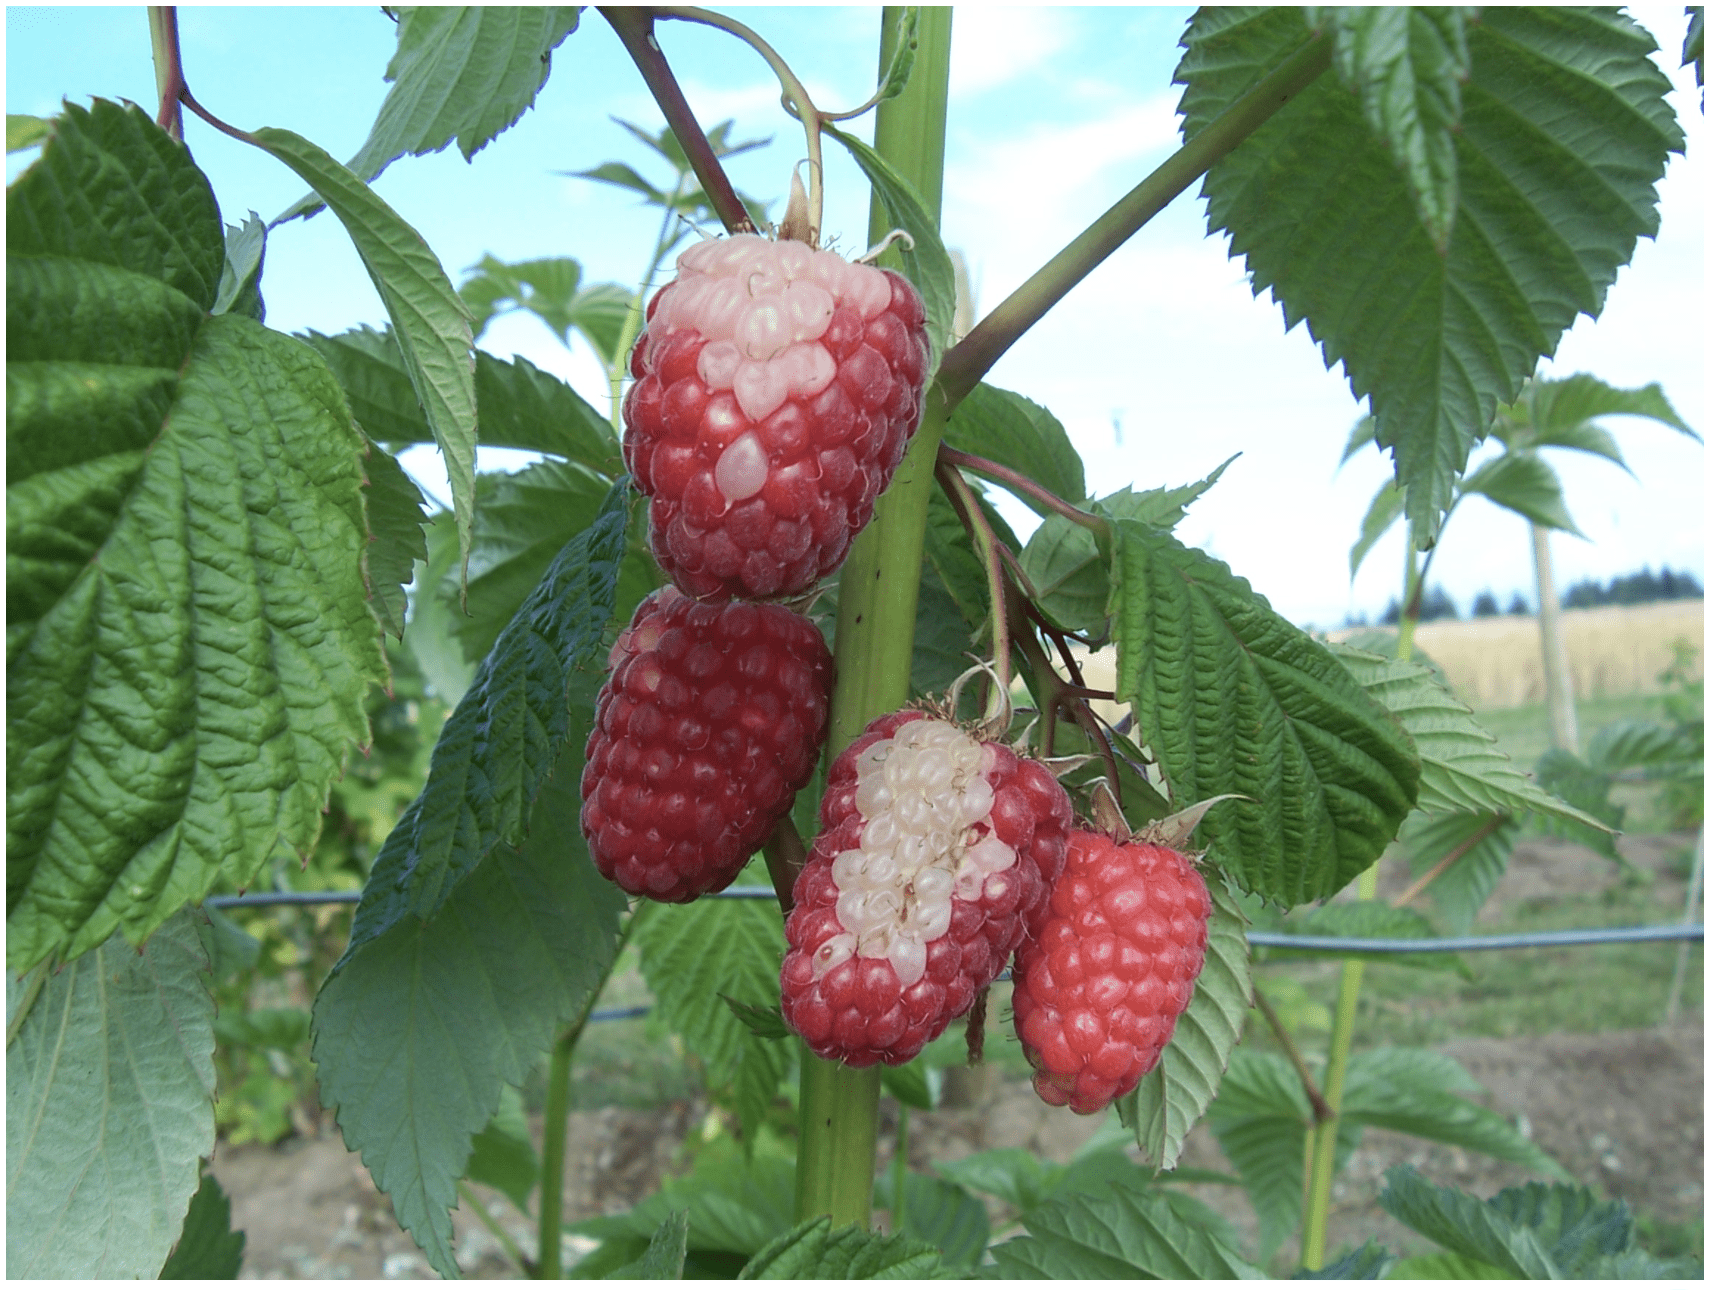 Growing Raspberries in Your Home Garden | Service OSU Extension